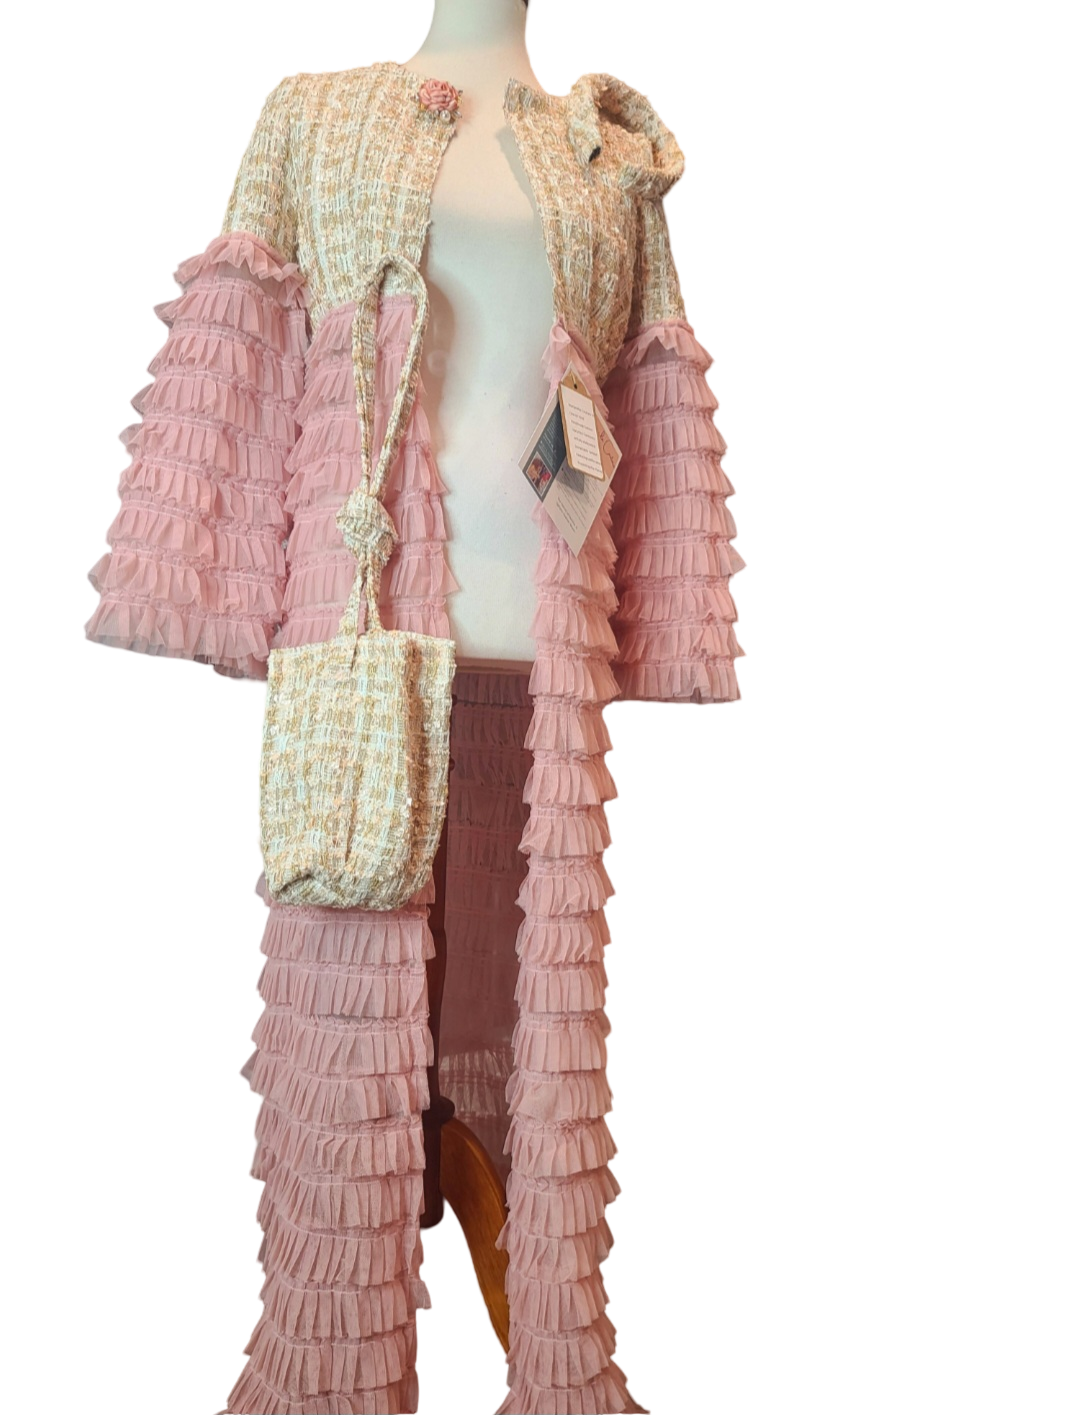 Luxury Cover Up Dress. Every summer needs new growth of flowers, fresh air, clean ocean and environmentally fashion. So, show up like chic ladies. This dress cover up is fantastic. Its the most feminine and eye catching ever.  Ruffles and soft pink...